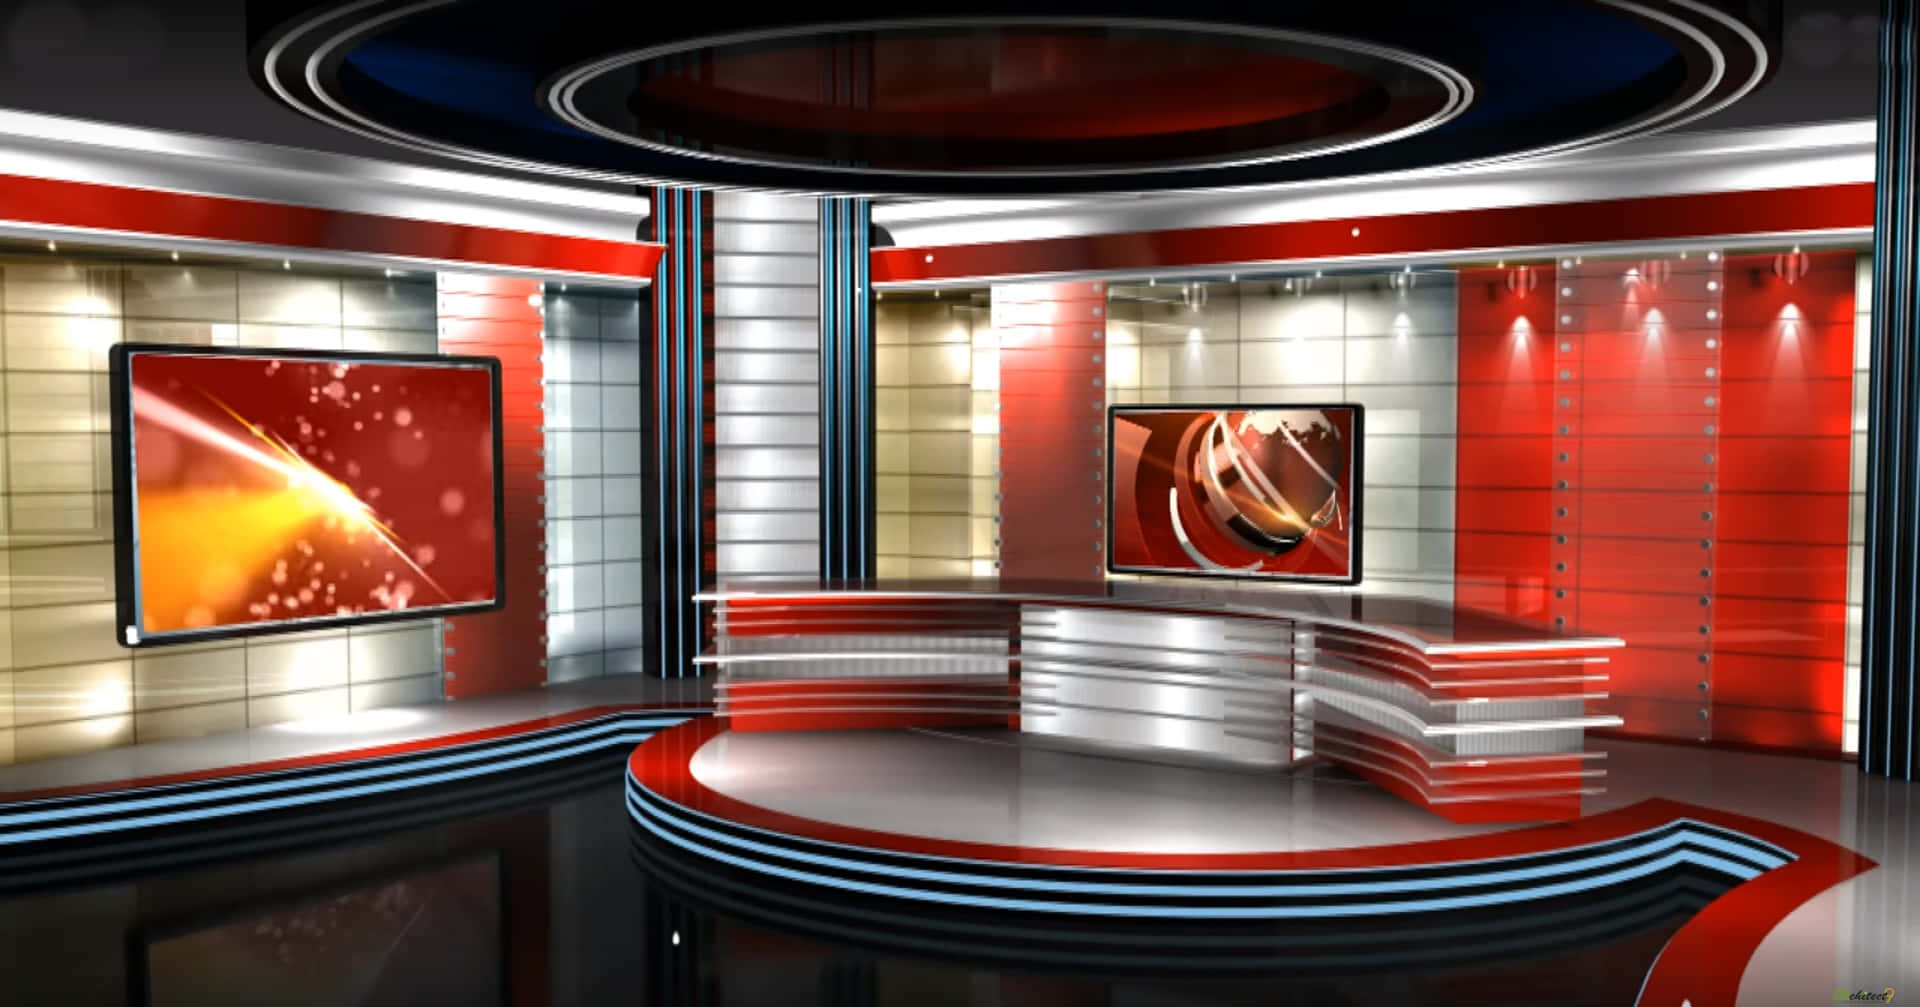 A Television Studio With Red And White Walls